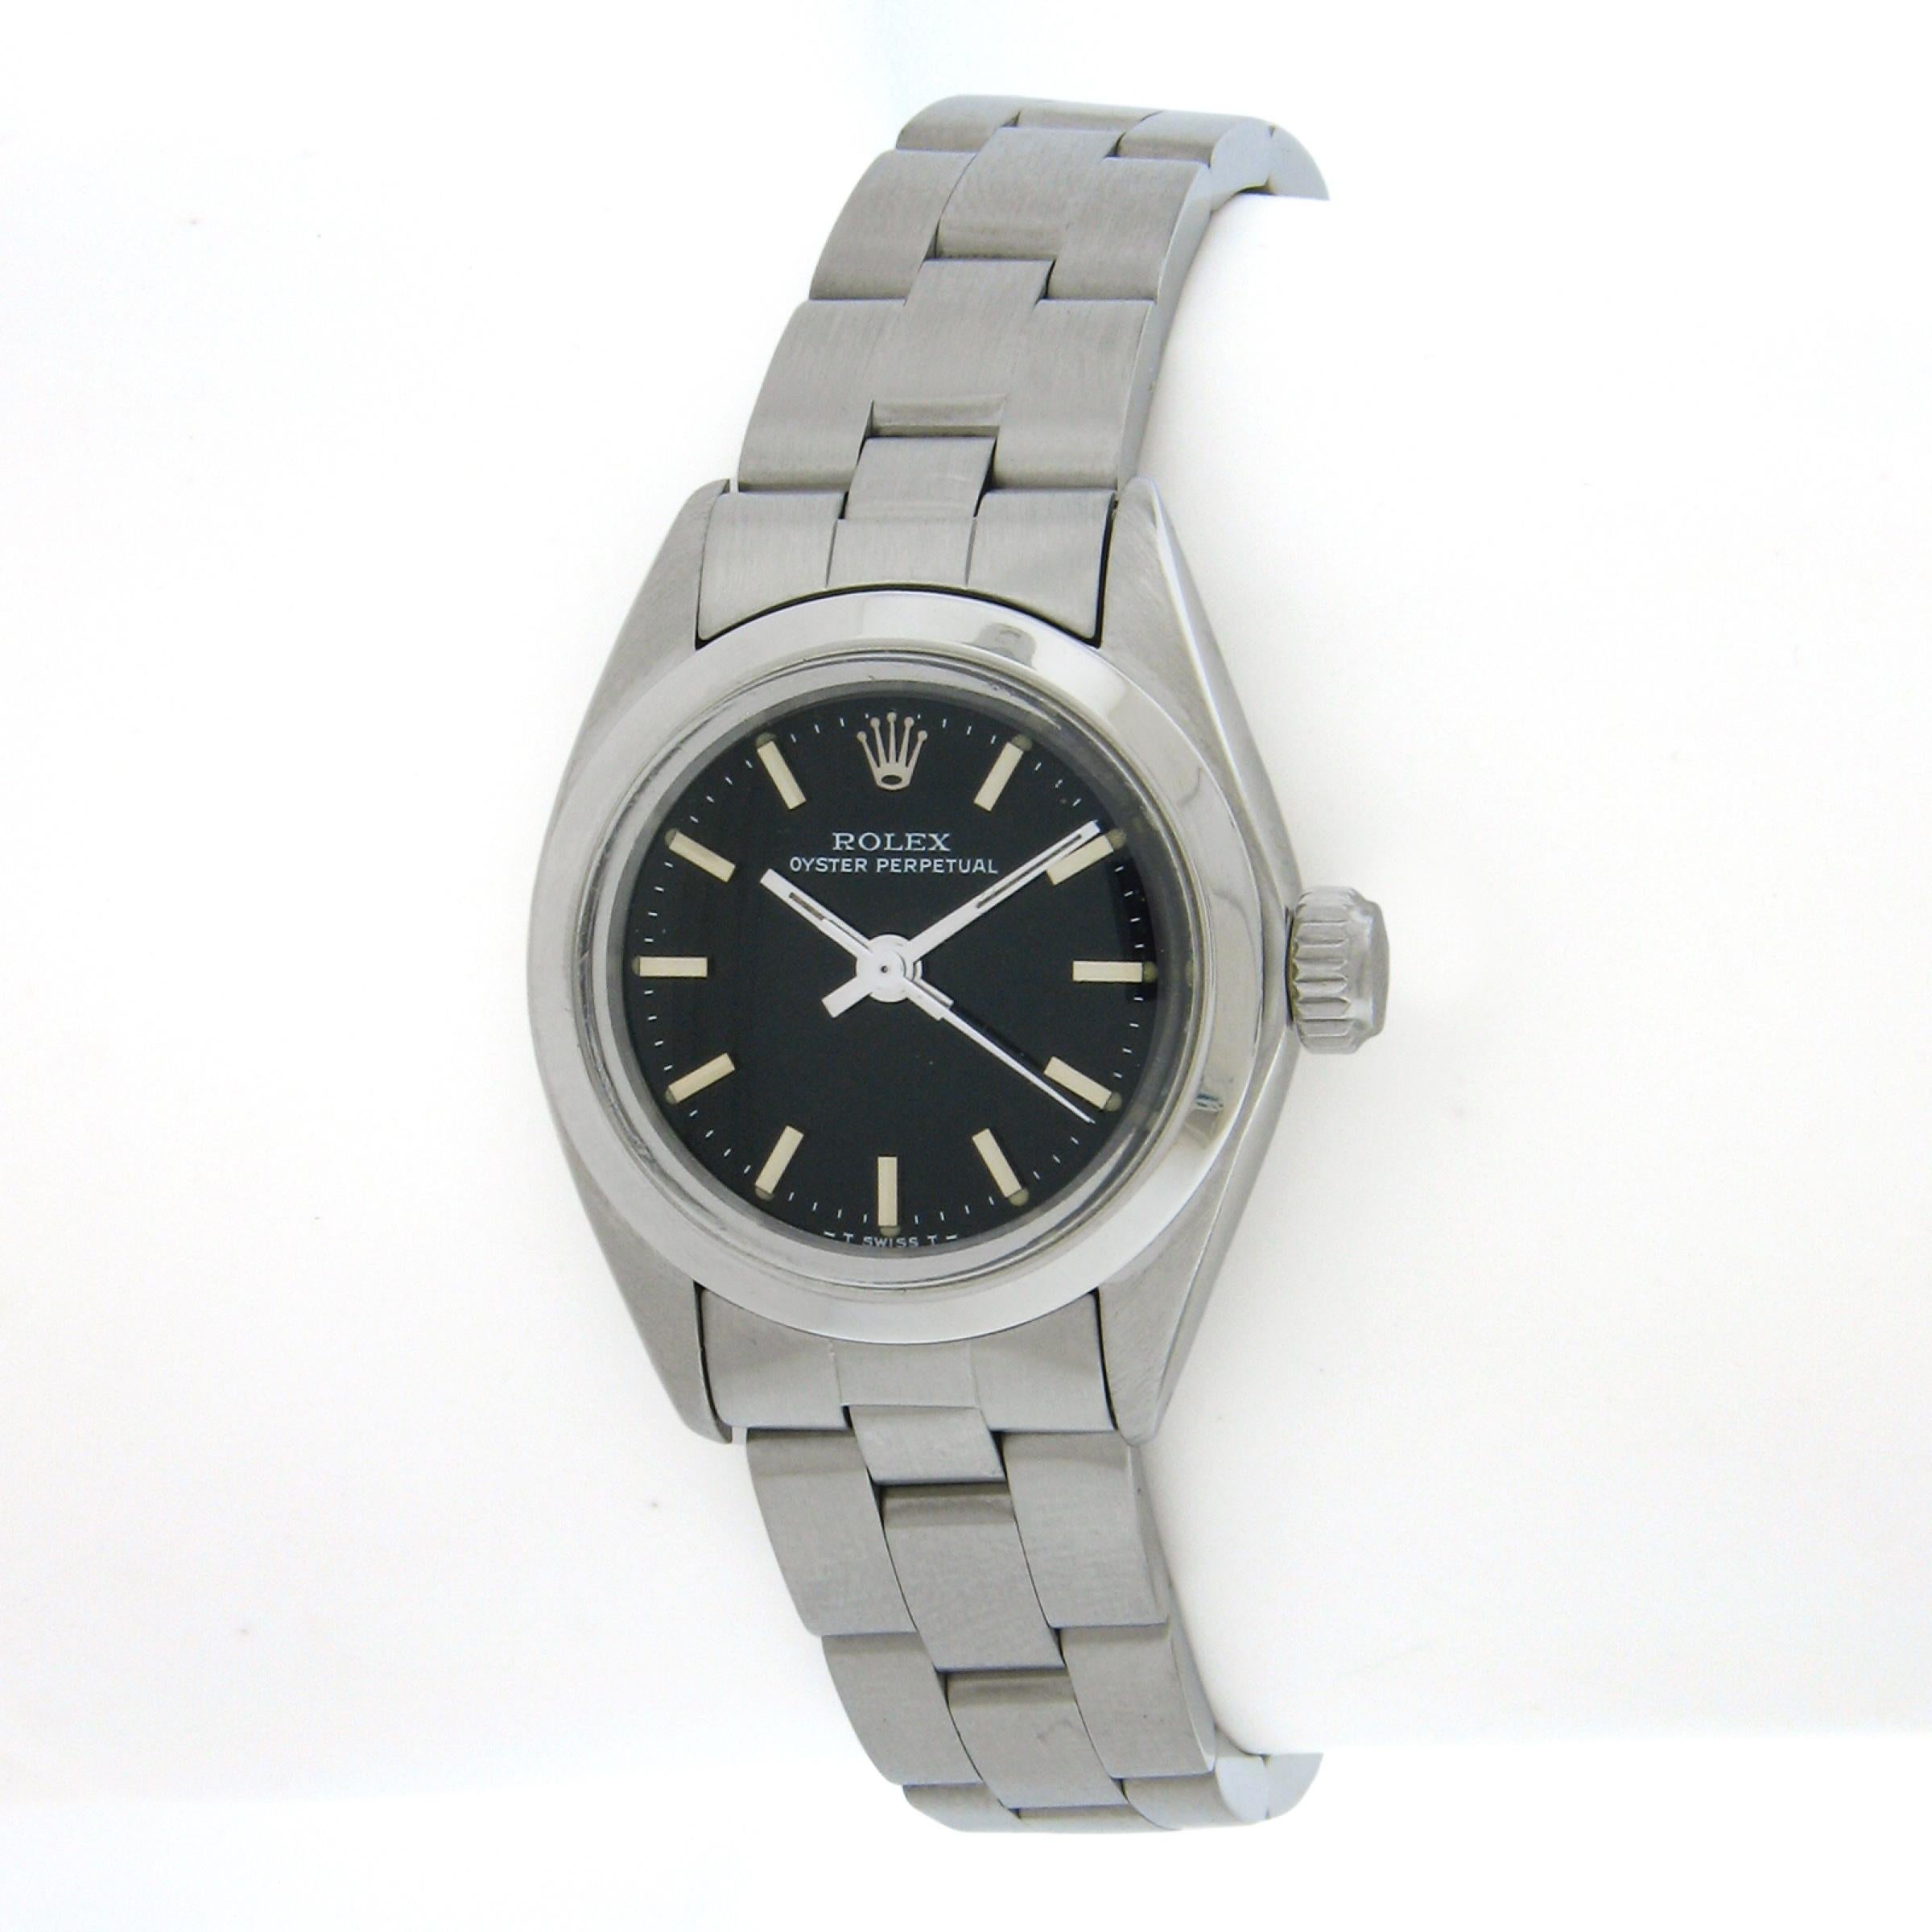 This gorgeous unisex Rolex Datejust is from 1981 and reference 6718. The automatic self-winding movement runs smoothly and keeps accurate time. The watch remains in excellent overall condition and the black dial makes this the perfect every day